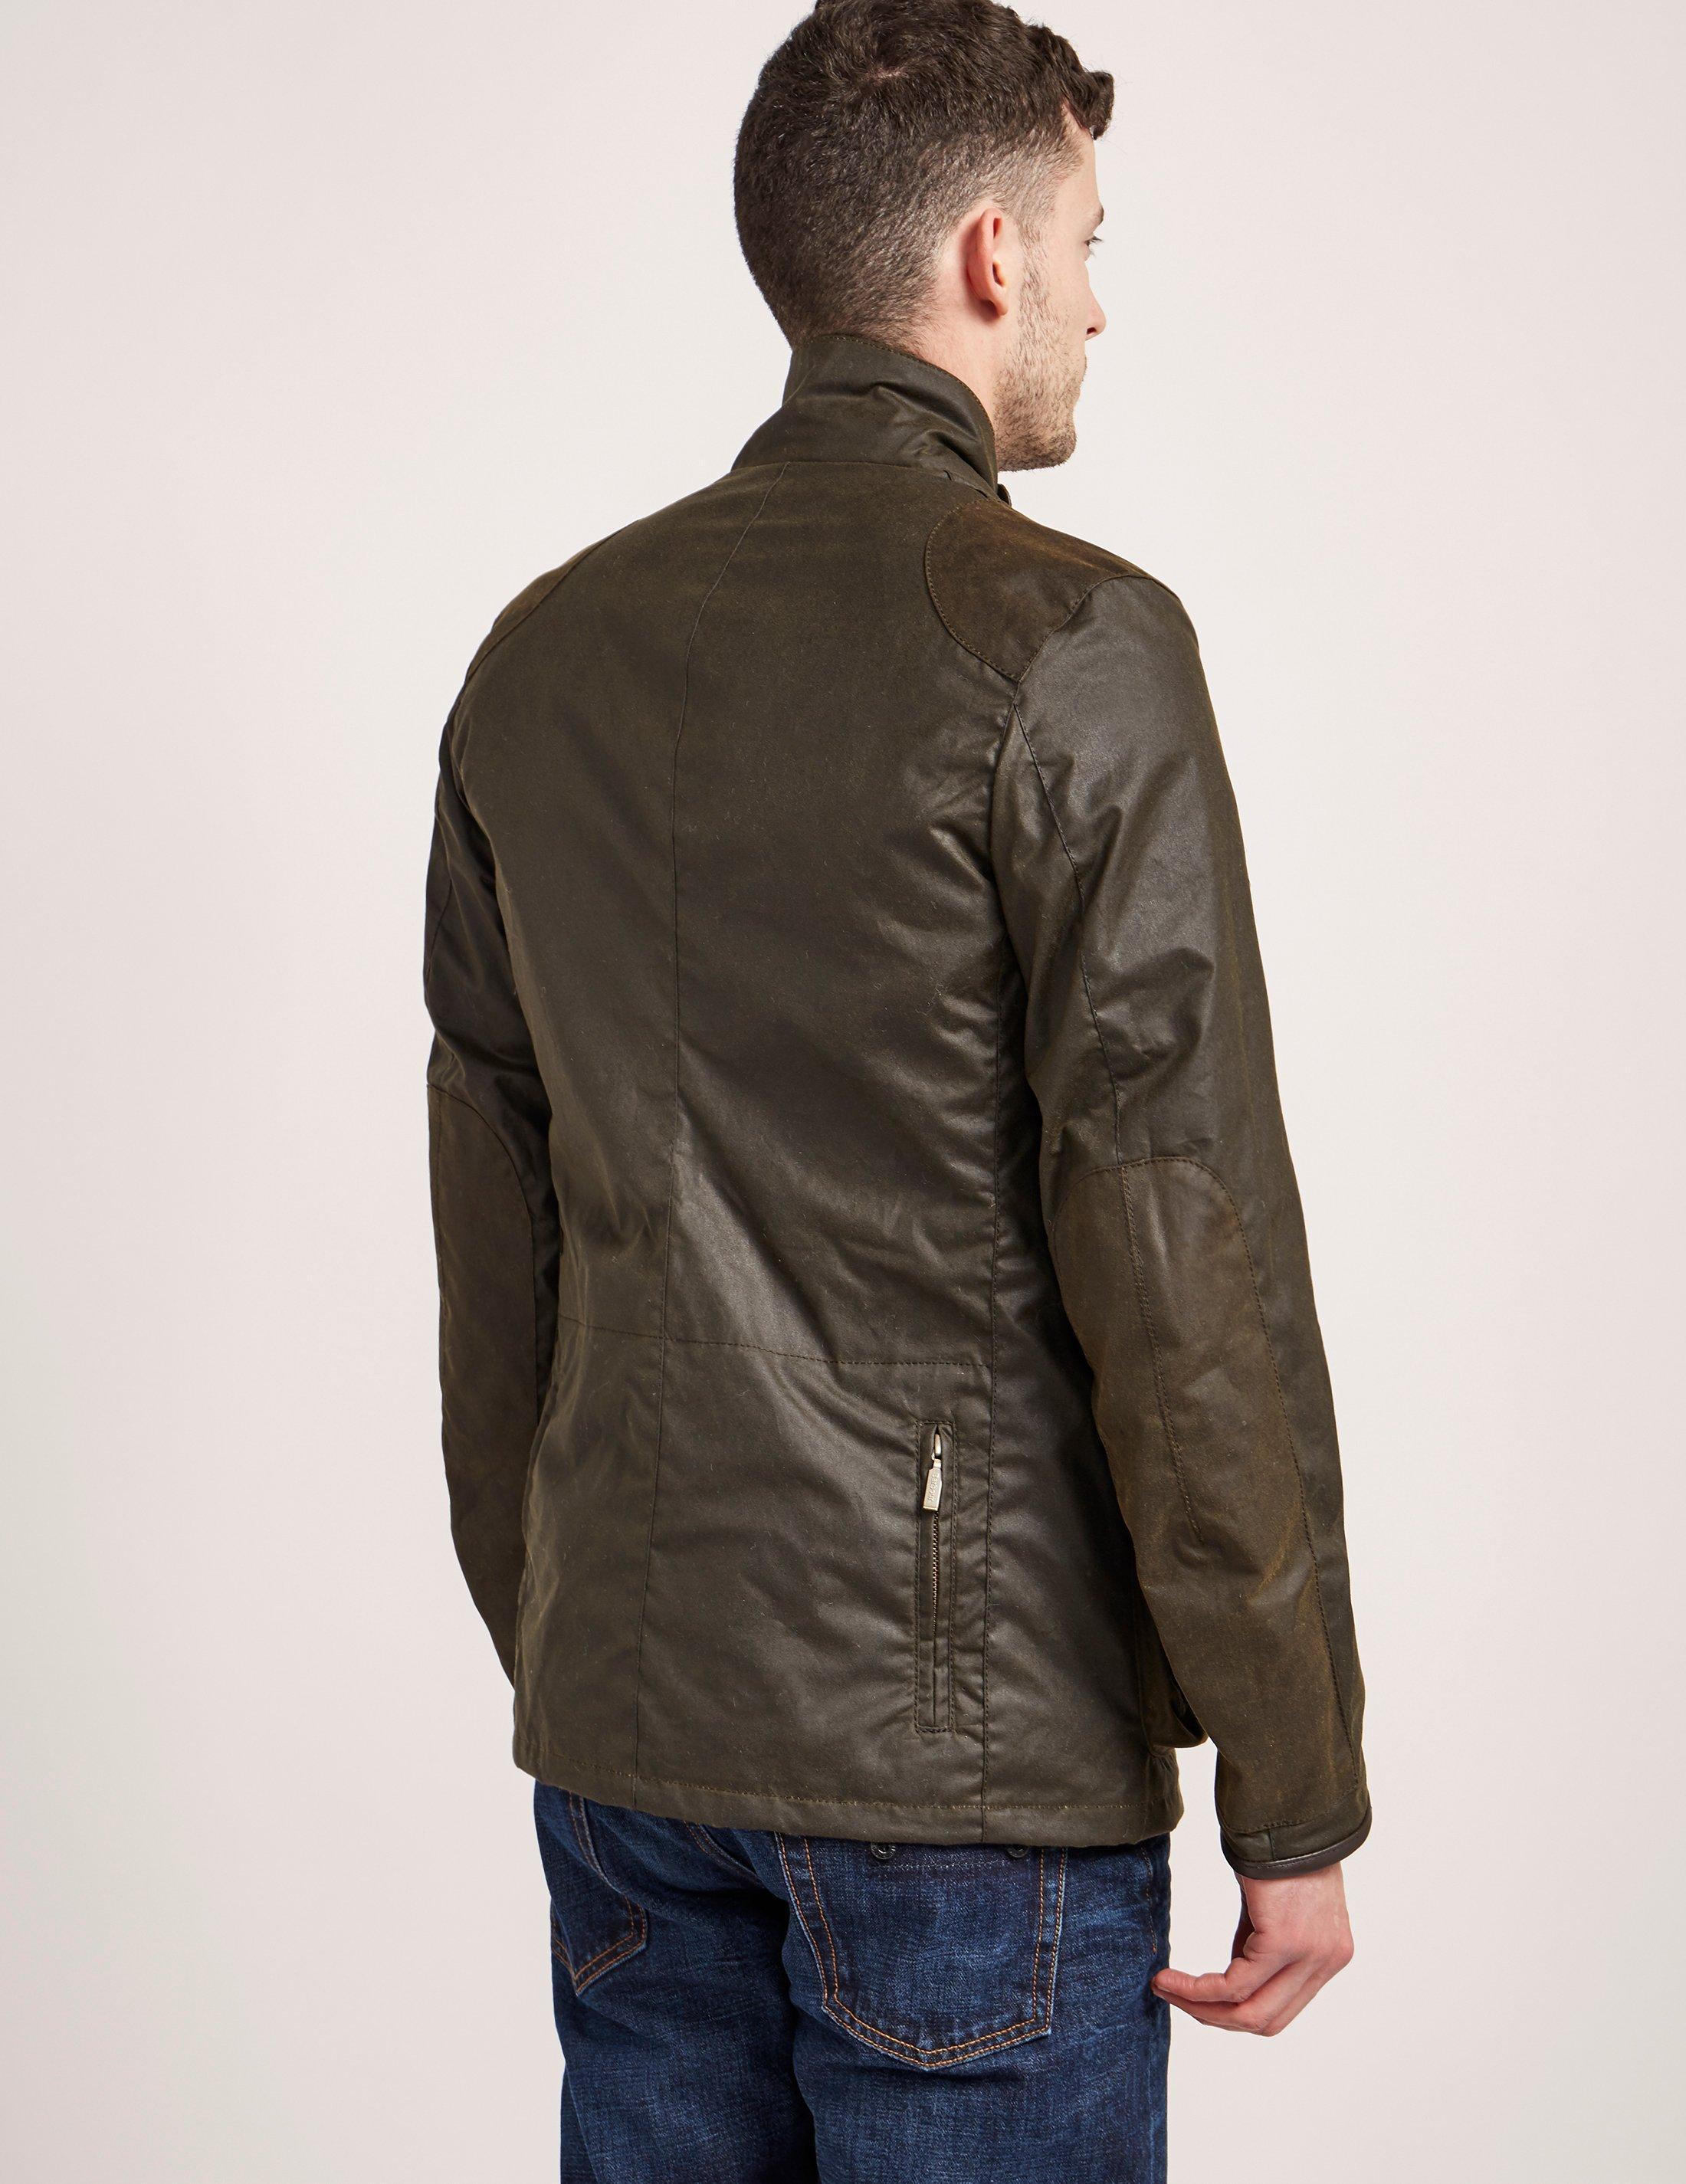 Barbour Cotton Beacon Sports Wax Jacket in Olive (Green) for Men - Lyst